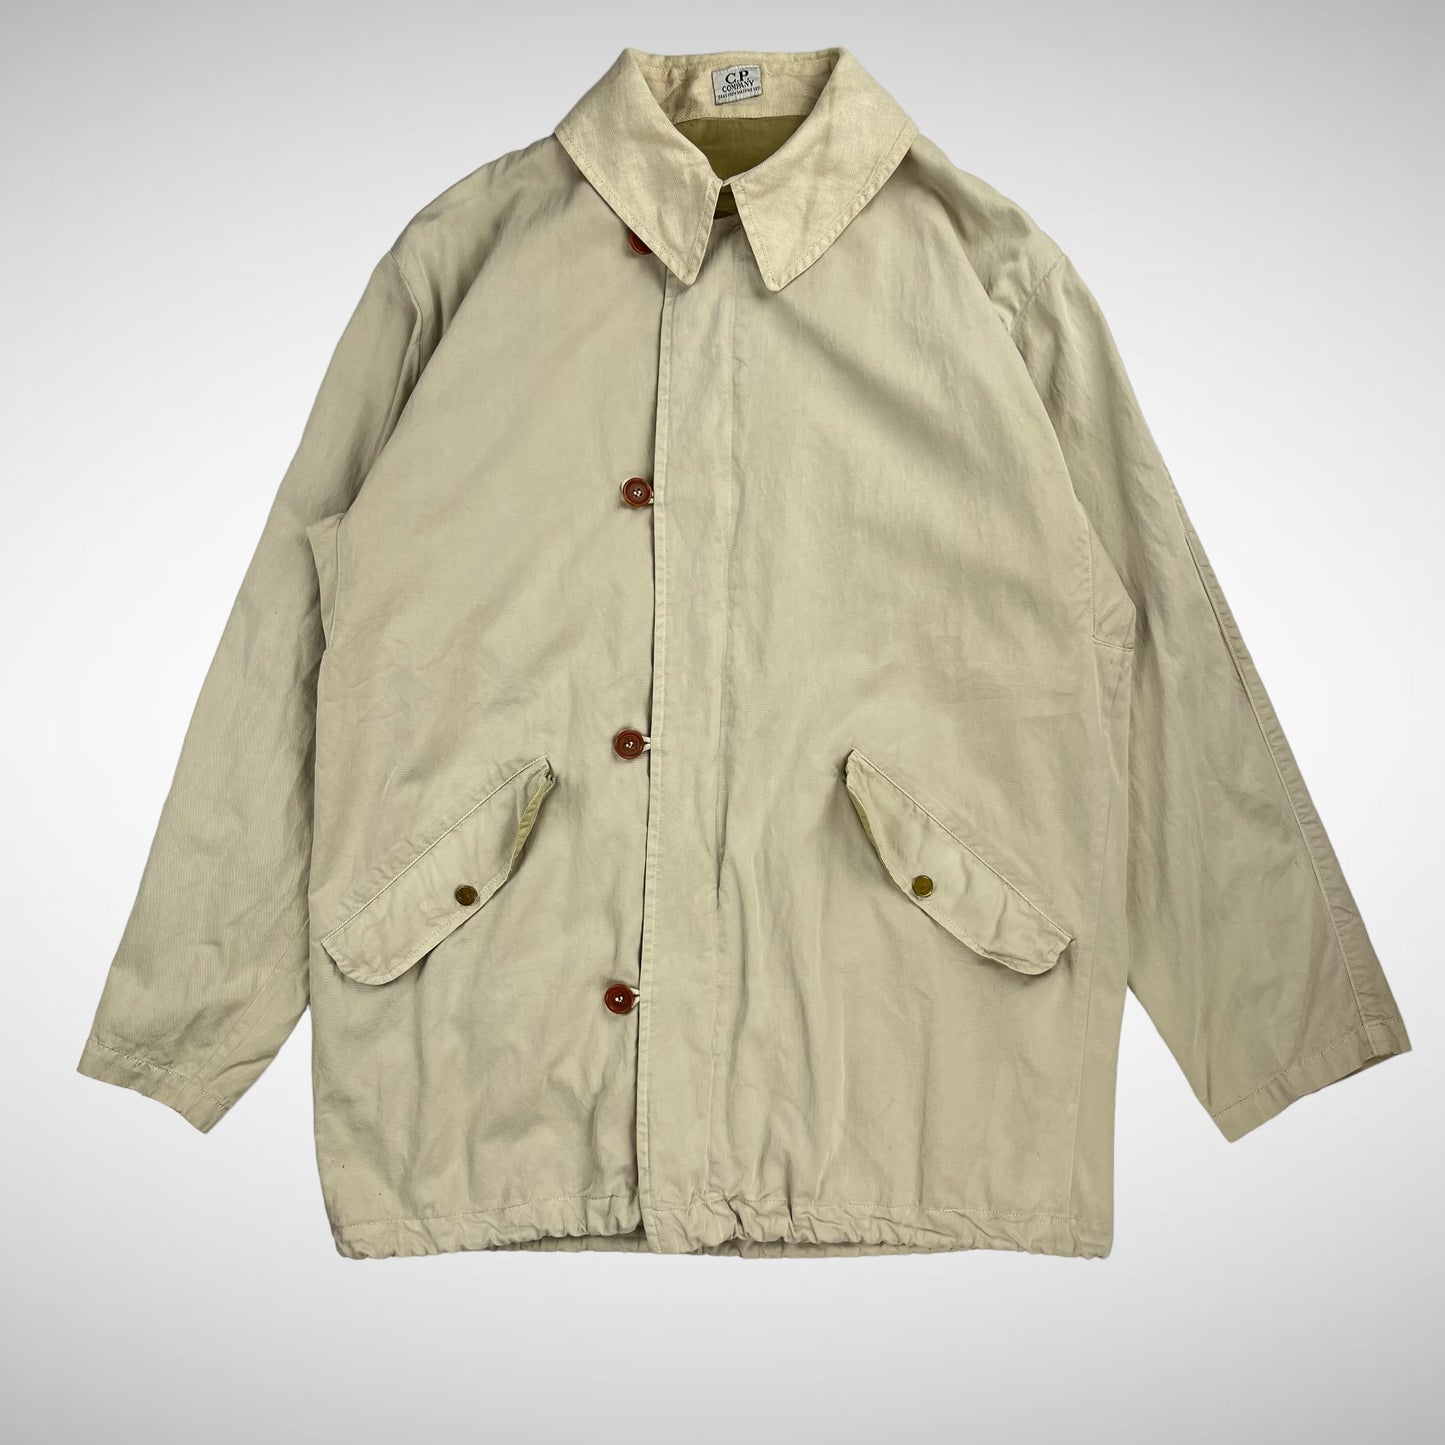 CP Company Garment Dyed Light Jacket (1990)